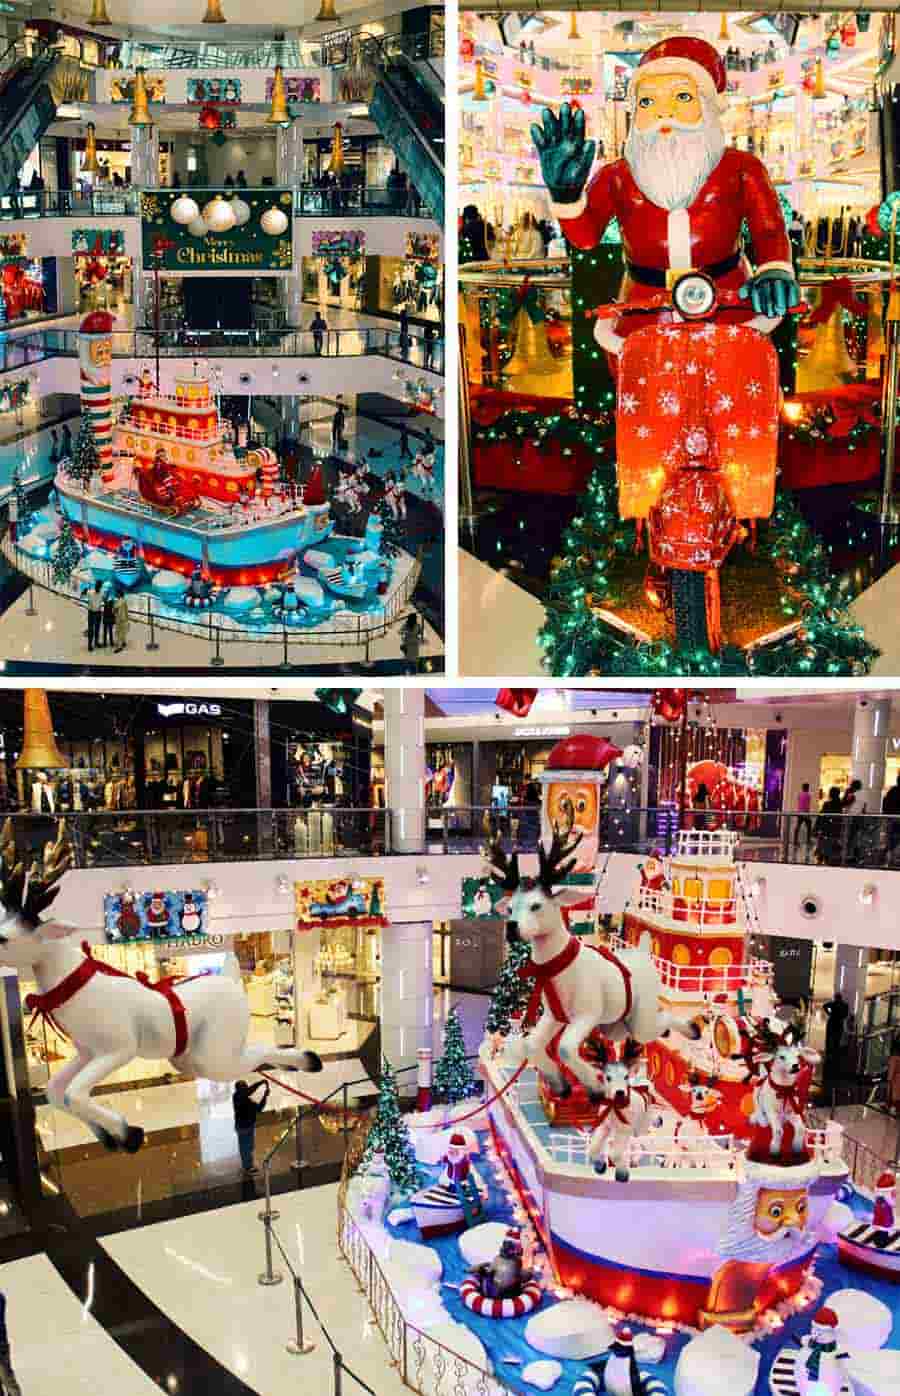 South City Mall steps into the Yuletide spirit with Christmas-themed decorations. Installations of reindeers, Santa Claus, polar bears and other season-special decorations have decked the interior and exterior of the mall